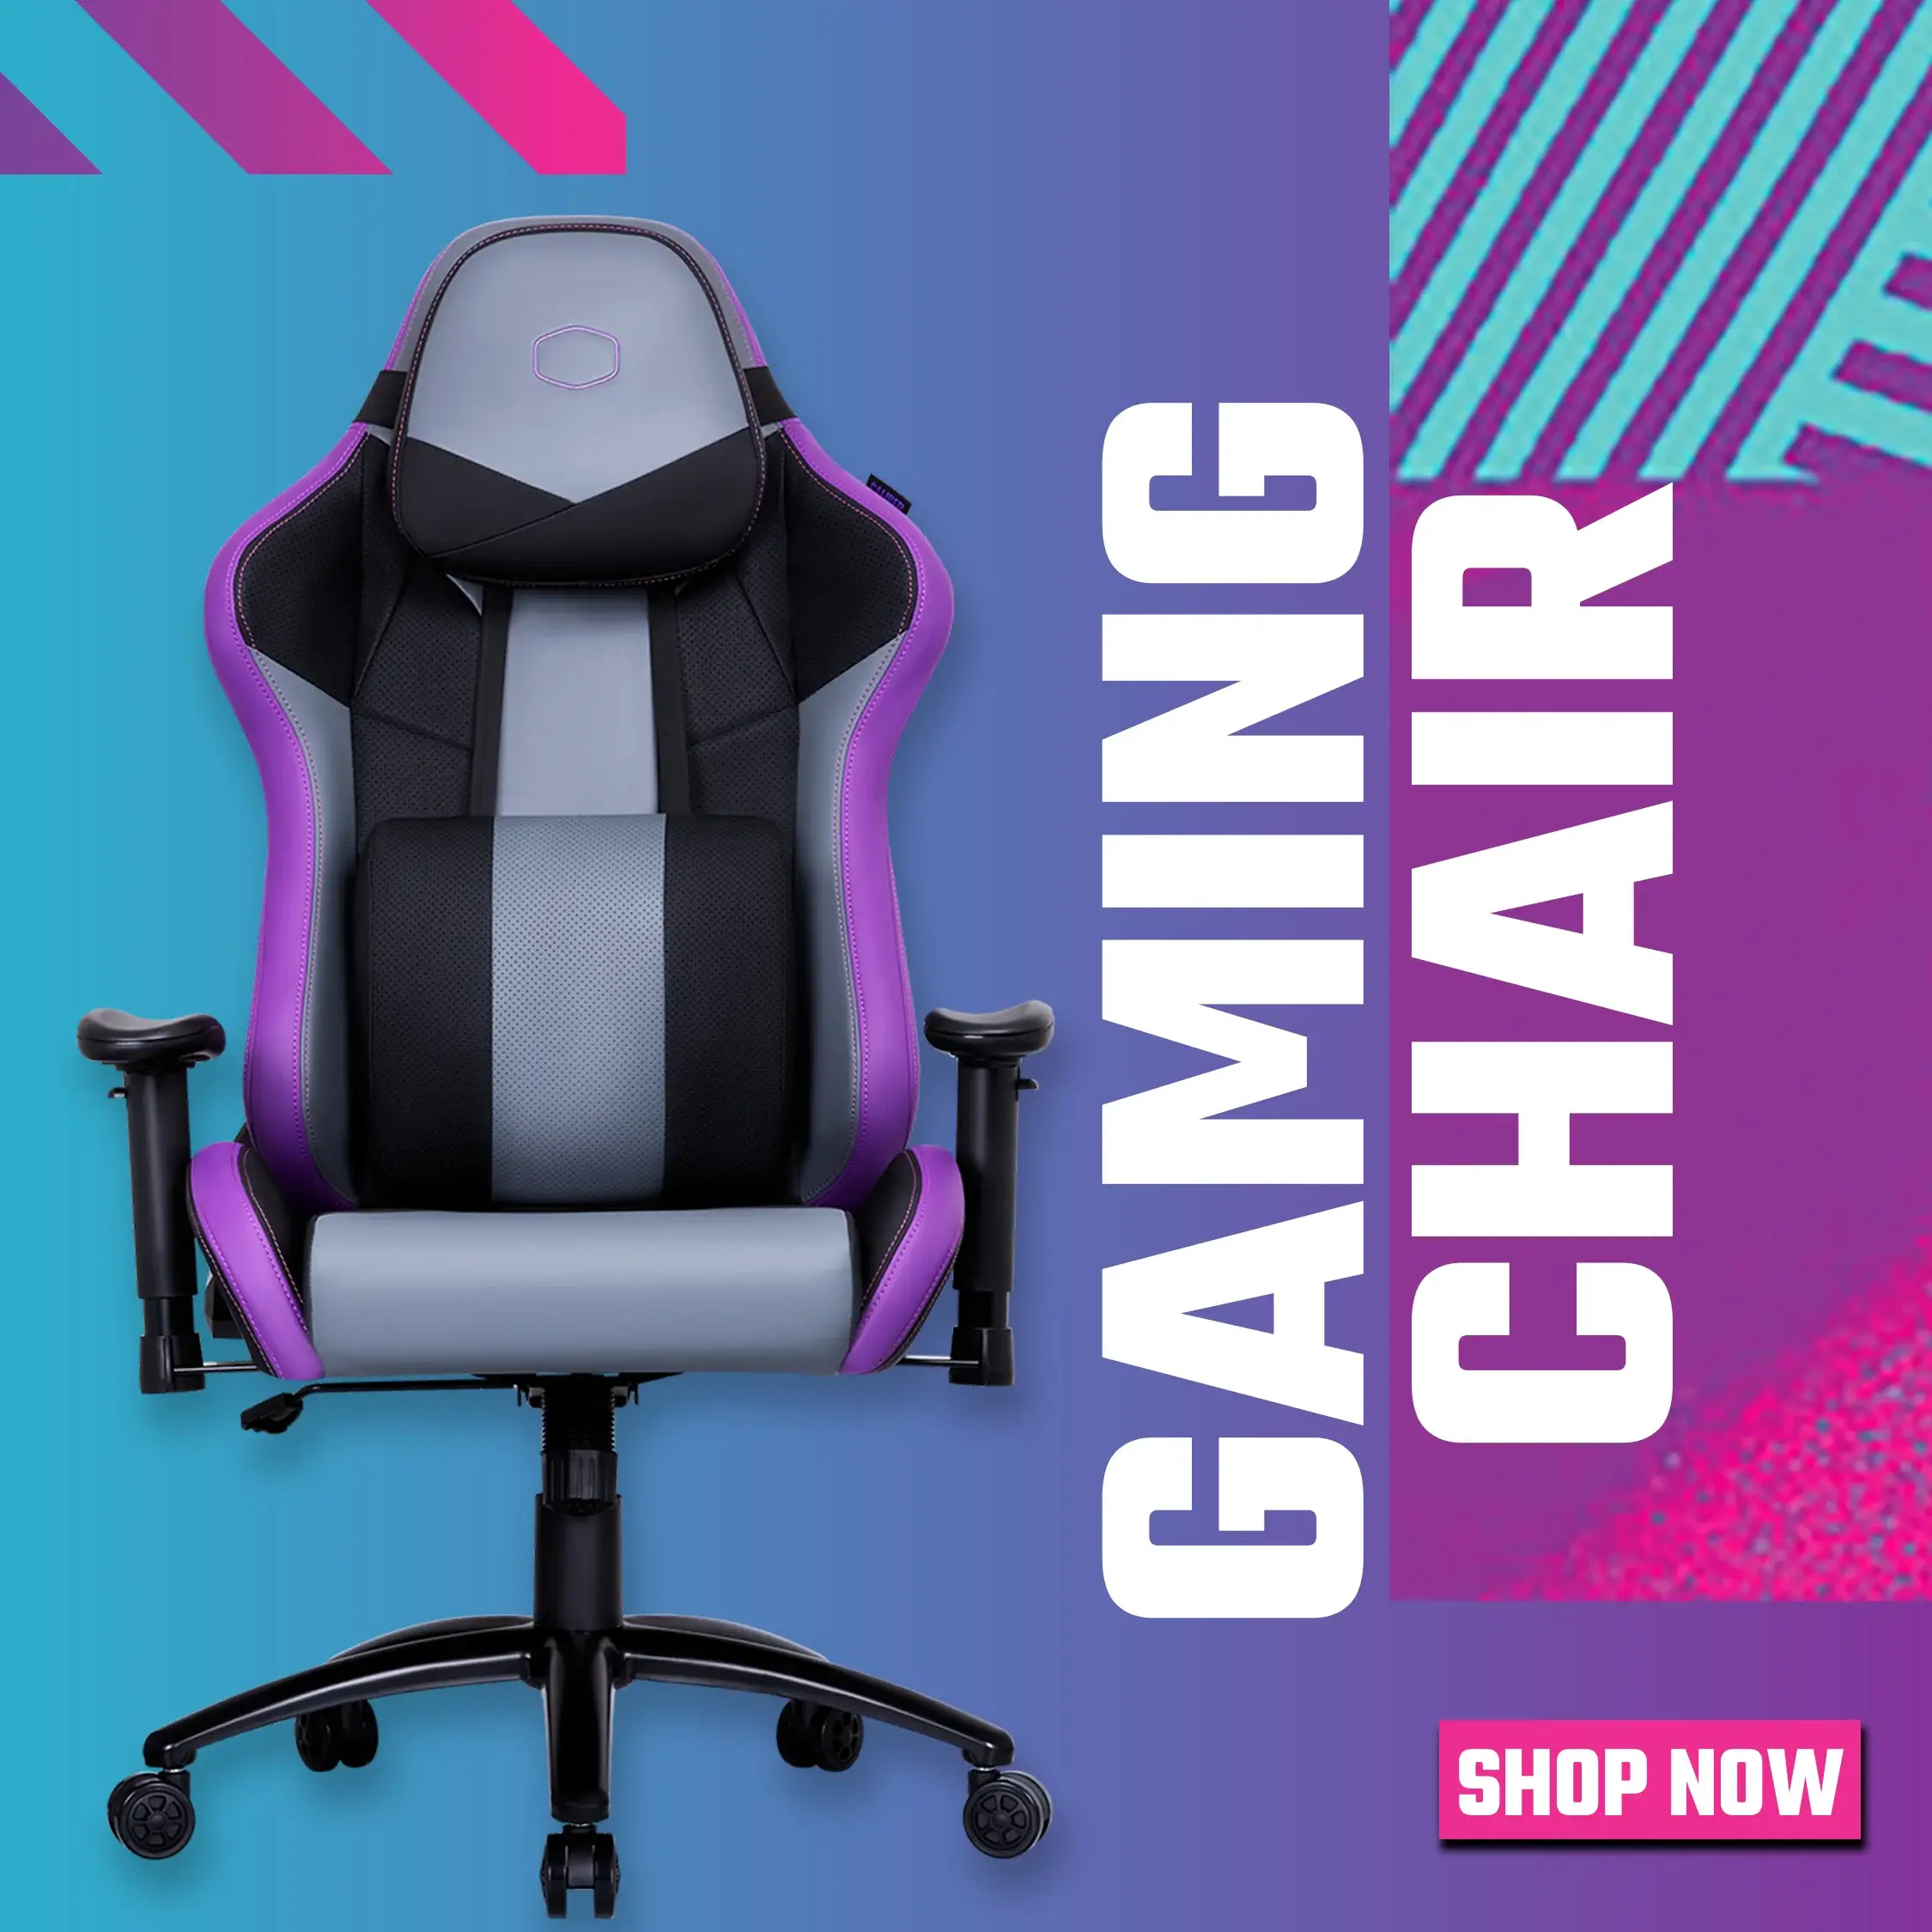 Cooler Master Gaming Chair